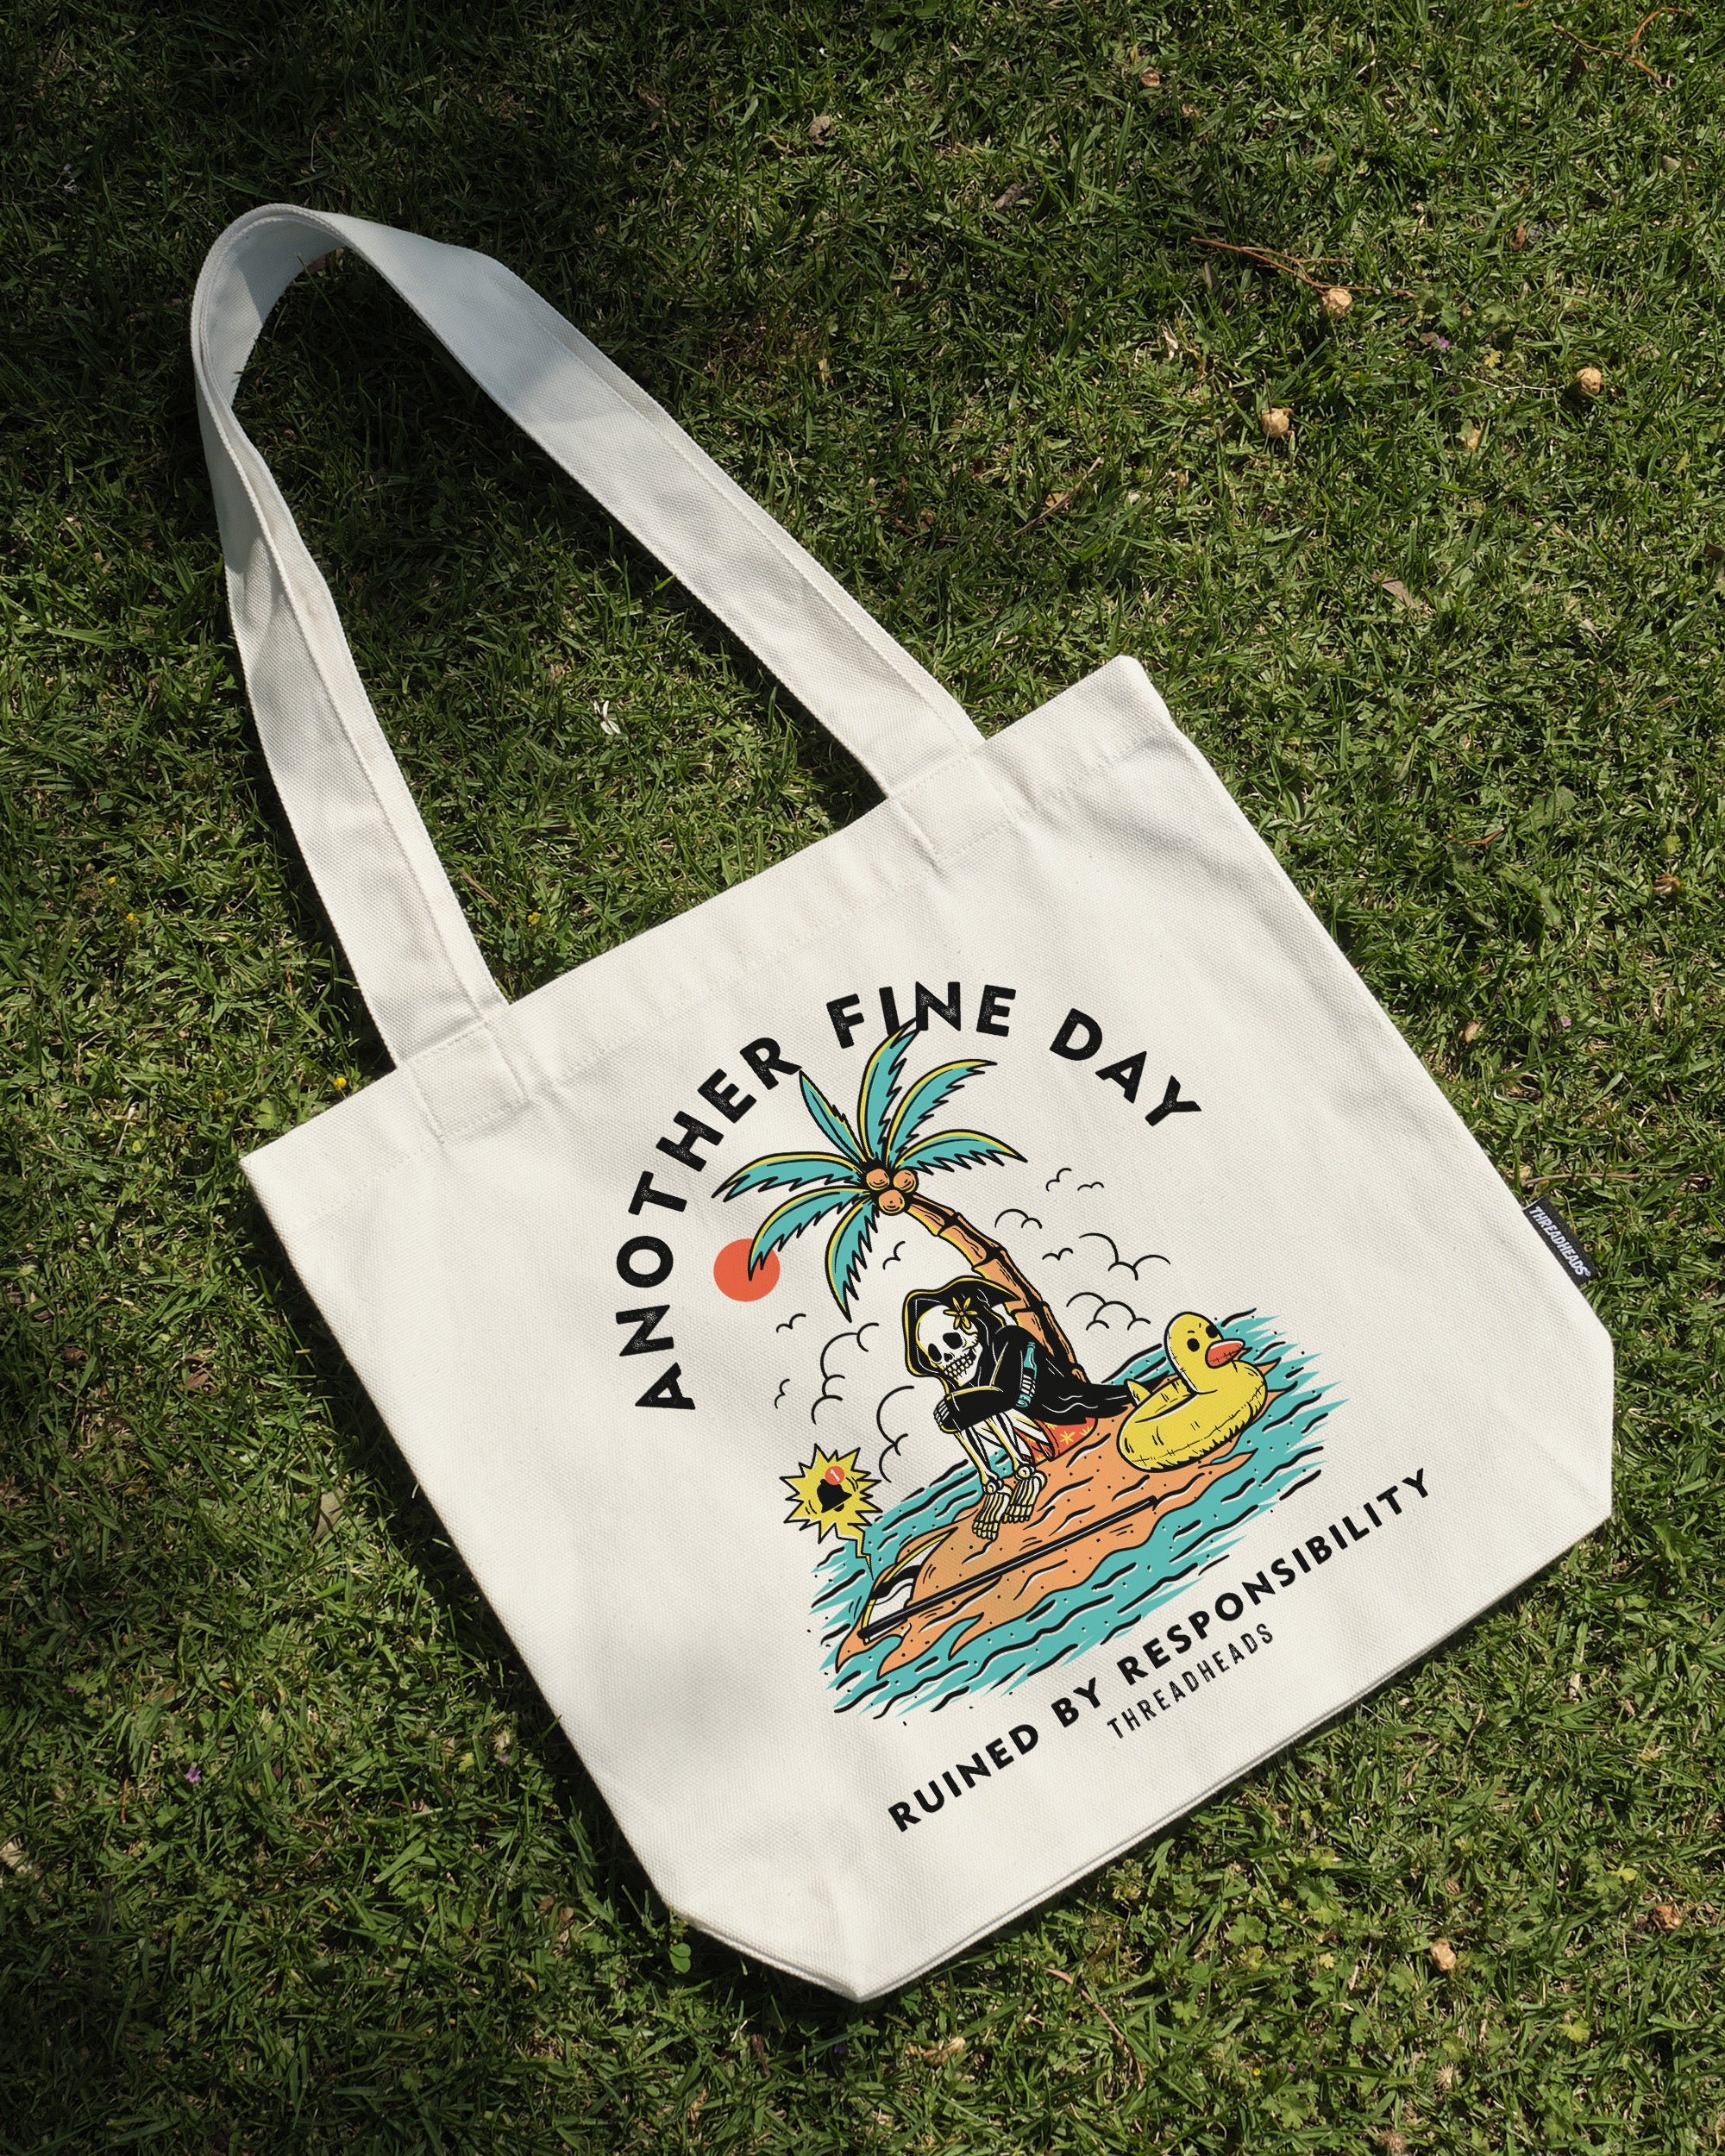 Another Fine Day Ruined by Responsibility Tote Bag Australia Online